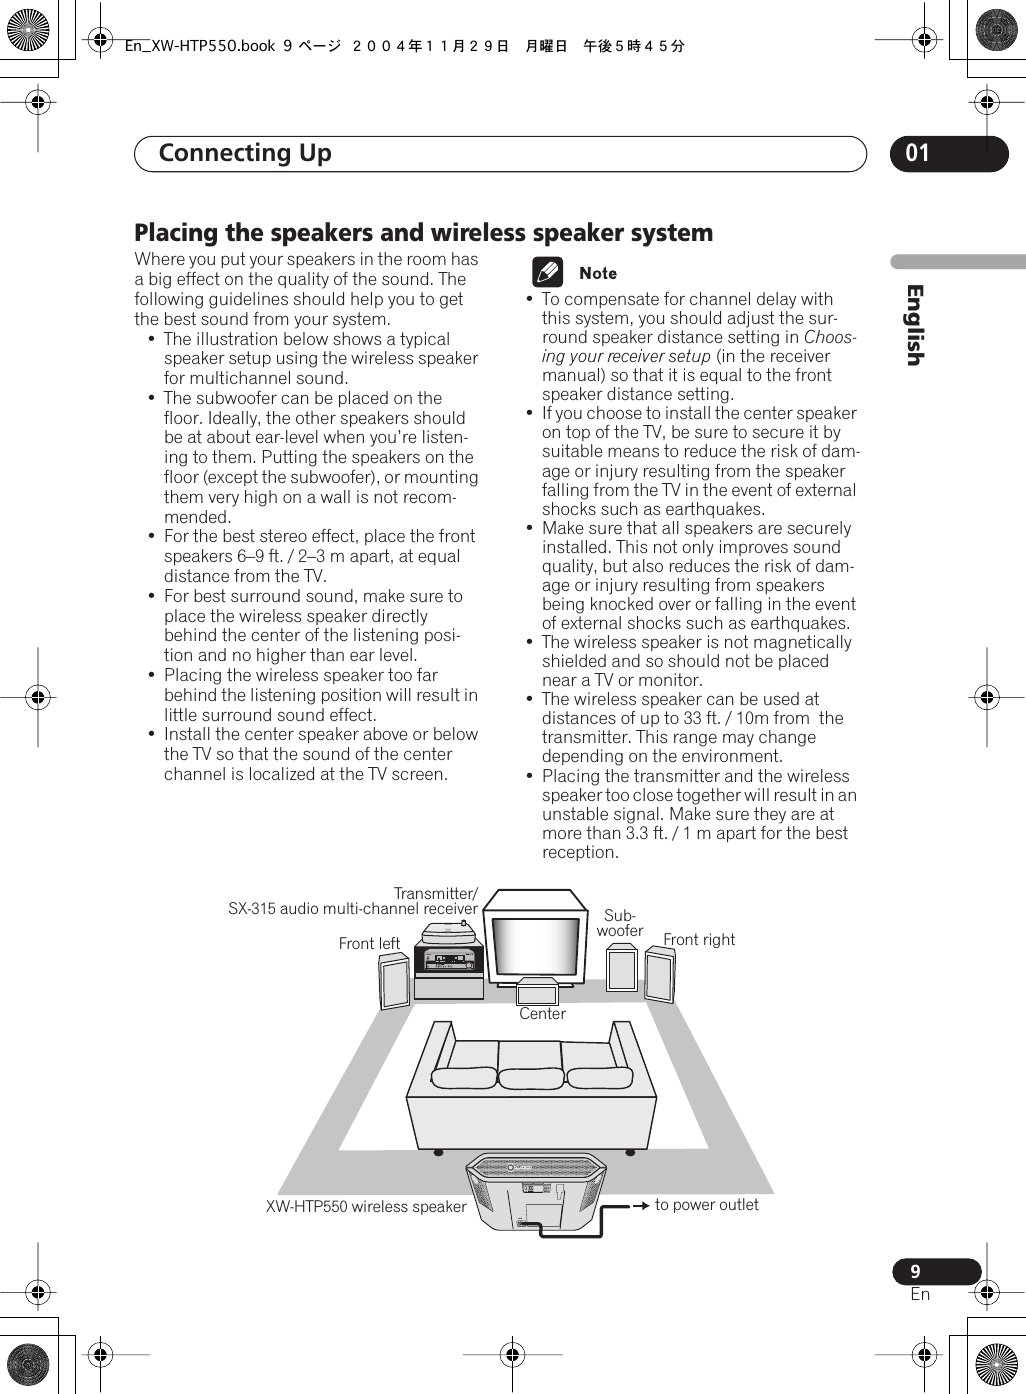  Connecting Up  01 9 En EnglishPlacing the speakers and wireless speaker system Where you put your speakers in the room has a big effect on the quality of the sound. The following guidelines should help you to get the best sound from your system.• The illustration below shows a typical speaker setup using the wireless speaker for multichannel sound.• The subwoofer can be placed on the floor. Ideally, the other speakers should be at about ear-level when you’re listen-ing to them. Putting the speakers on the floor (except the subwoofer), or mounting them very high on a wall is not recom-mended.• For the best stereo effect, place the front speakers 6–9 ft. / 2–3 m apart, at equal distance from the TV.• For best surround sound, make sure to place the wireless speaker directly behind the center of the listening posi-tion and no higher than ear level. • Placing the wireless speaker too far behind the listening position will result in little surround sound effect. •Install the center speaker above or below the TV so that the sound of the center channel is localized at the TV screen.• To compensate for channel delay with this system, you should adjust the sur-round speaker distance setting in  Choos-ing your receiver setup  (in the receiver manual) so that it is equal to the front speaker distance setting.•If you choose to install the center speaker on top of the TV, be sure to secure it by suitable means to reduce the risk of dam-age or injury resulting from the speaker falling from the TV in the event of external shocks such as earthquakes.• Make sure that all speakers are securely installed. This not only improves sound quality, but also reduces the risk of dam-age or injury resulting from speakers being knocked over or falling in the event of external shocks such as earthquakes.• The wireless speaker is not magnetically shielded and so should not be placed near a TV or monitor.• The wireless speaker can be used at distances of up to 33 ft. / 10m from  the transmitter. This range may change depending on the environment.• Placing the transmitter and the wireless speaker too close together will result in an unstable signal. Make sure they are at more than 3.3 ft. / 1 m apart for the best reception.CHANNELCenterFront rightFront leftXW-HTP550 wireless speaker to power outletSub- wooferTransmitter/ SX-315 audio multi-channel receiverAC INPOWEROFF ONTUNEDEn_XW-HTP550.book 9 ページ ２００４年１１月２９日　月曜日　午後５時４５分